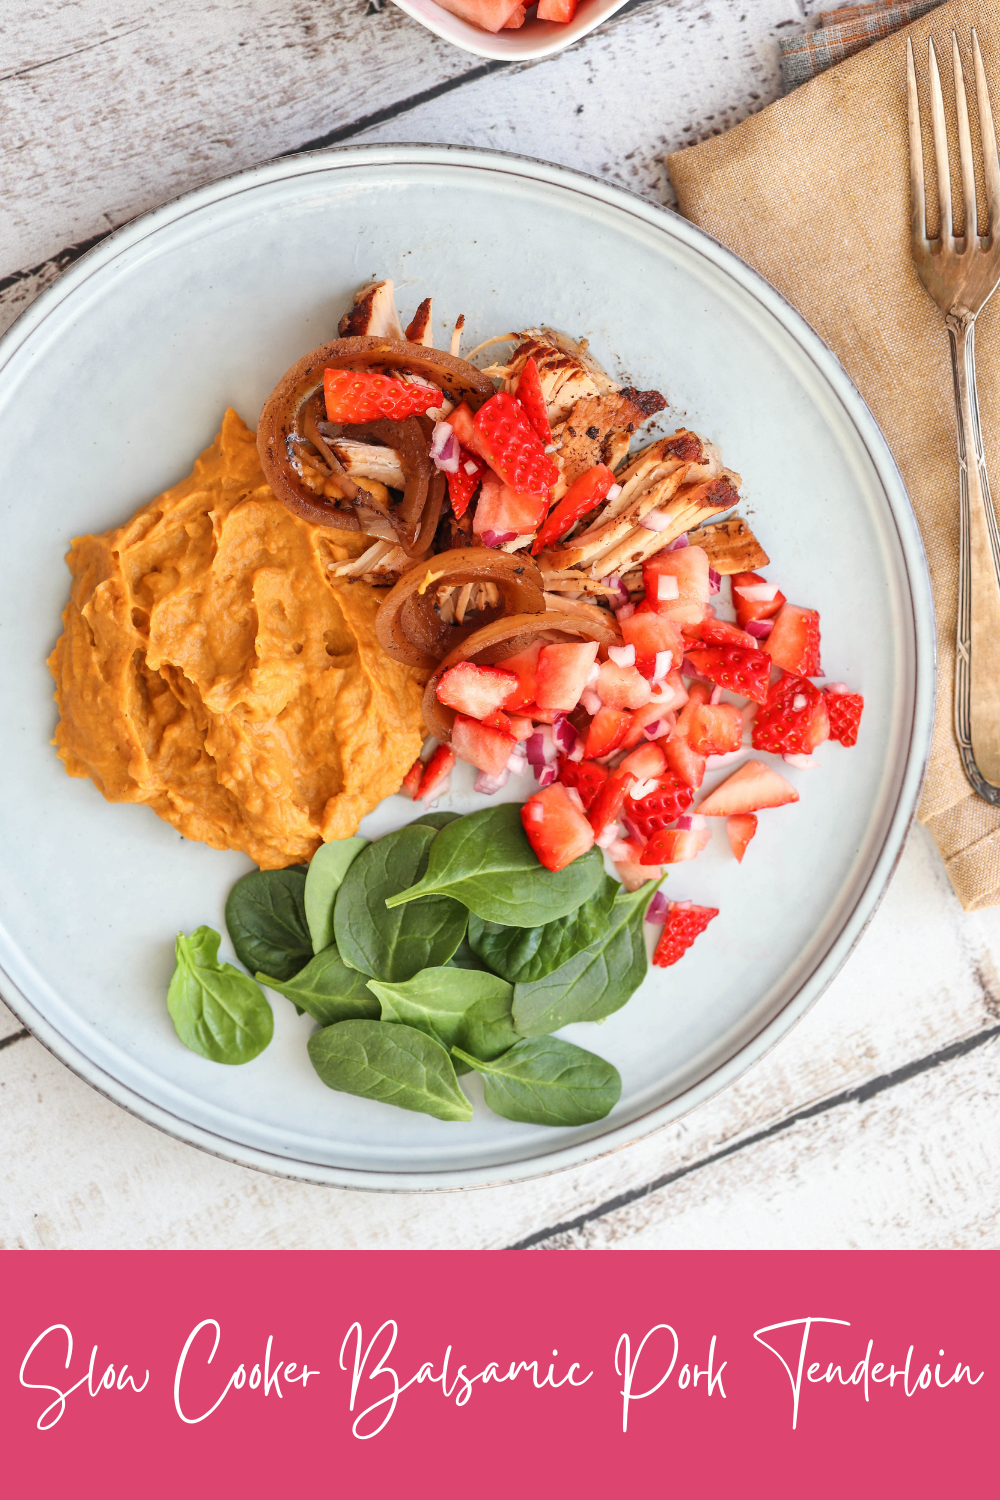 Slow Cooker Balsamic Pork Tenderloin with Strawberry Salsa, less than 300 calories and only 10 minutes to prepare, such a lovely summery meal, you won't believe it's part of a healthy diet.